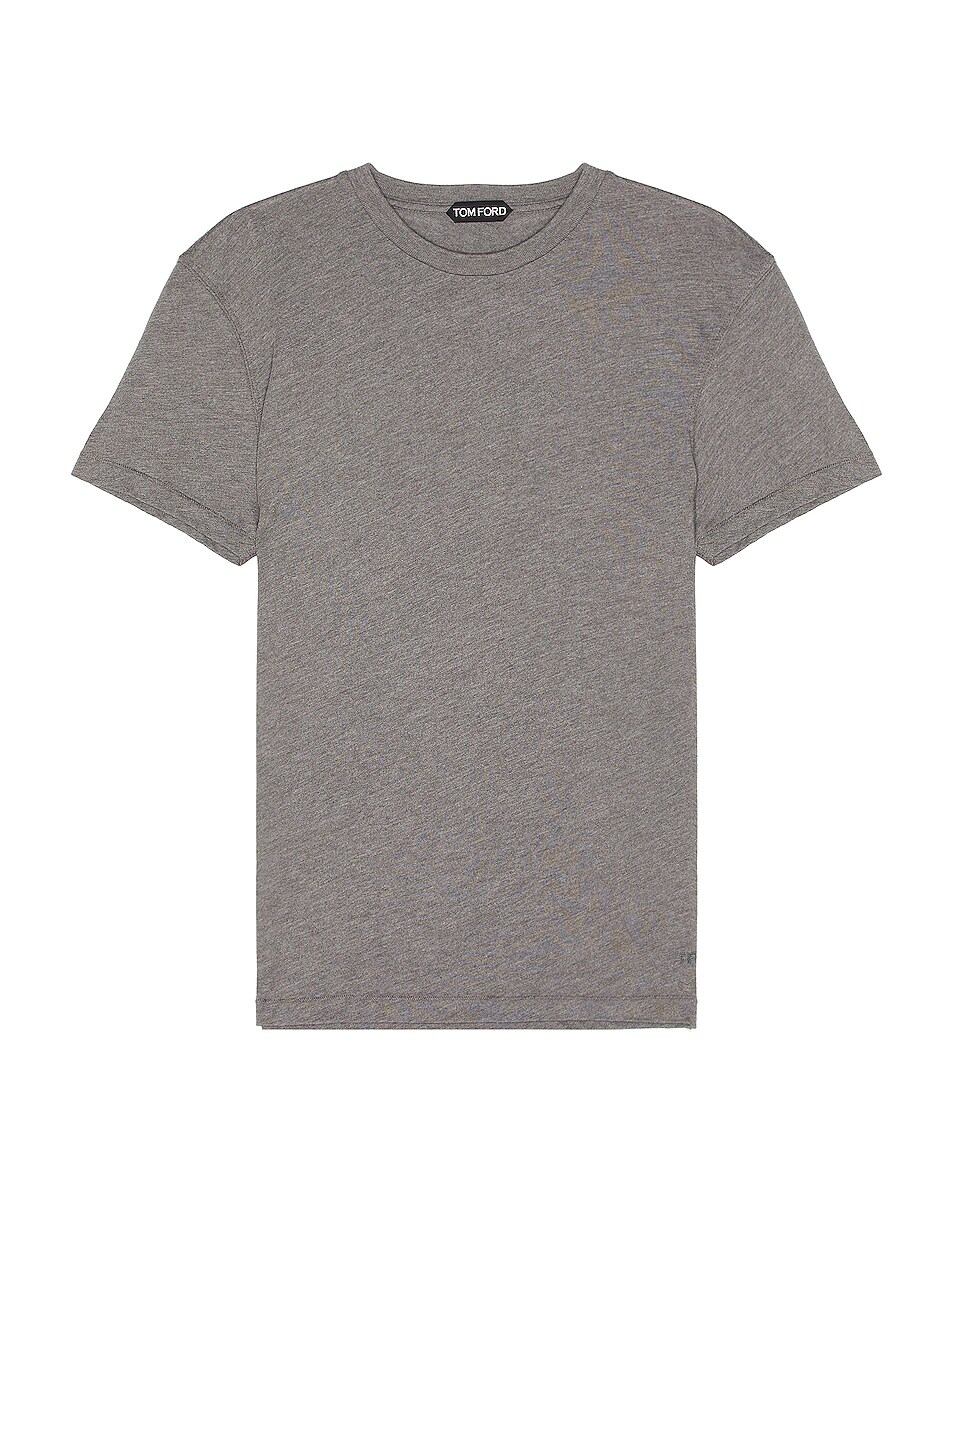 Image 1 of TOM FORD Cotton Blend Ss Crew Neck in Grey